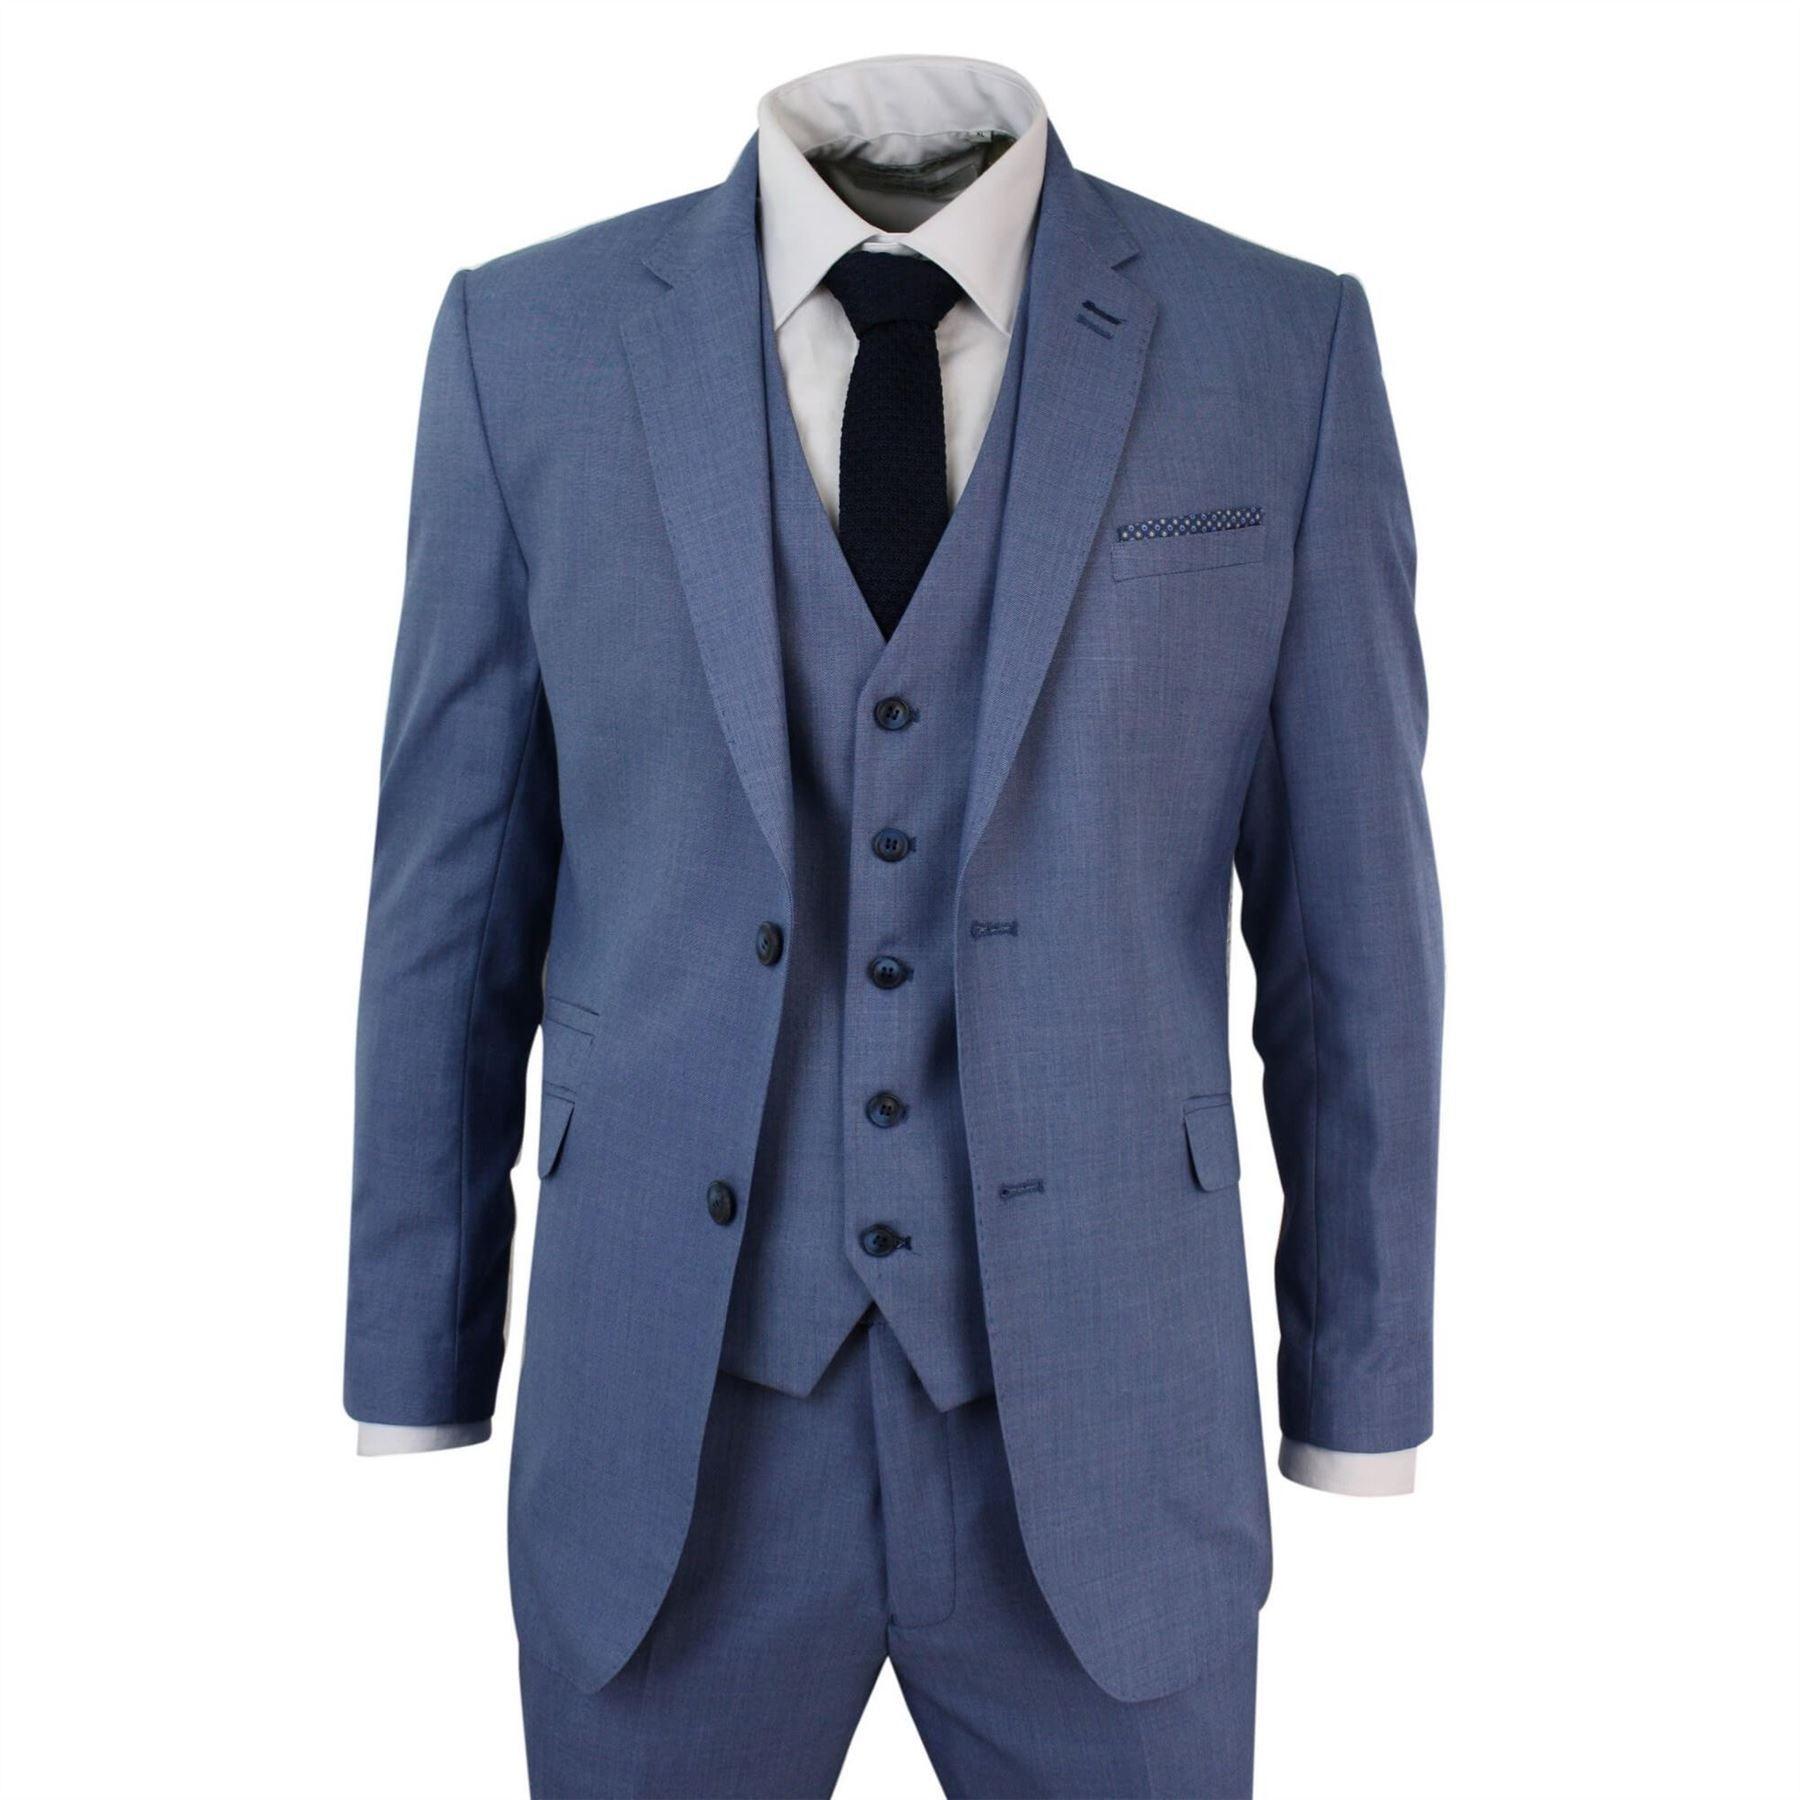 Mens Light Sky Blue 3 Piece Smart Formal Wedding Party Suit Tailored Fit - Knighthood Store